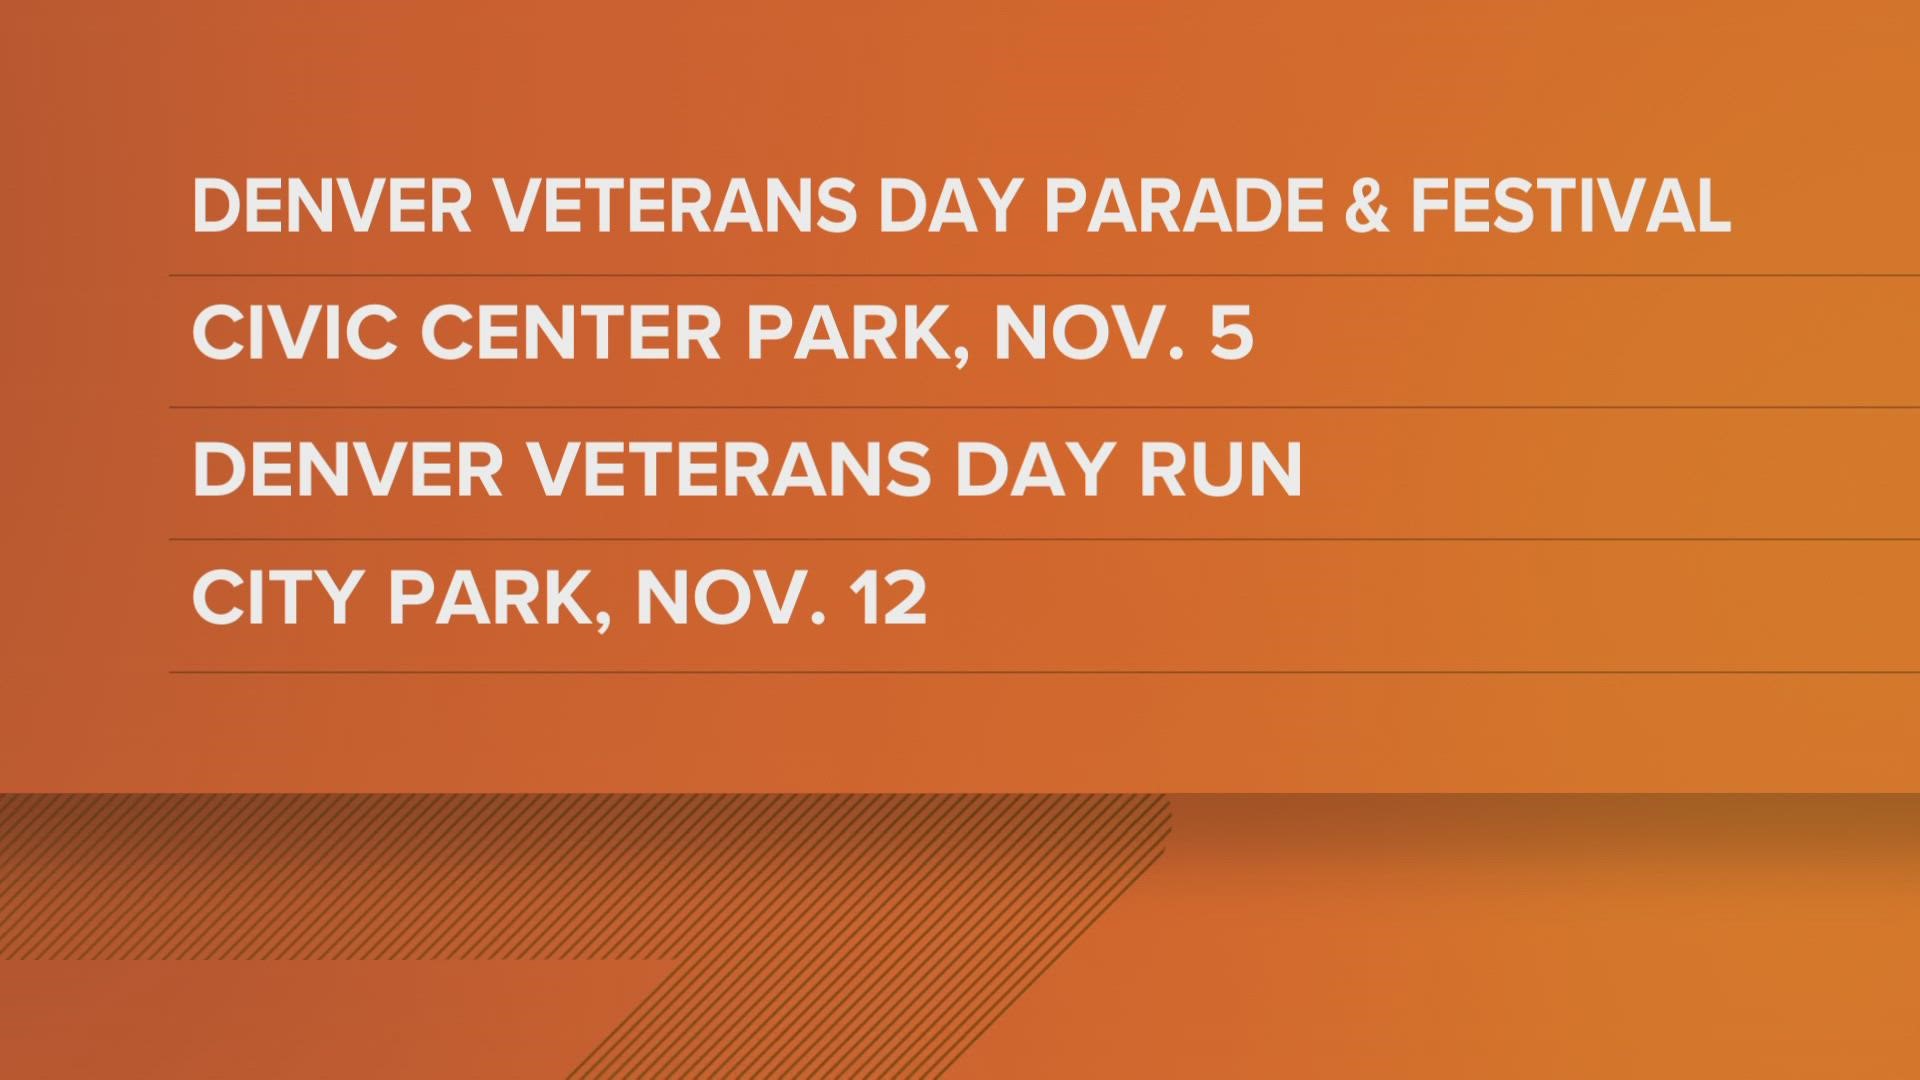 The Denver Veteran's Day Parade is back for the first time since 2019.